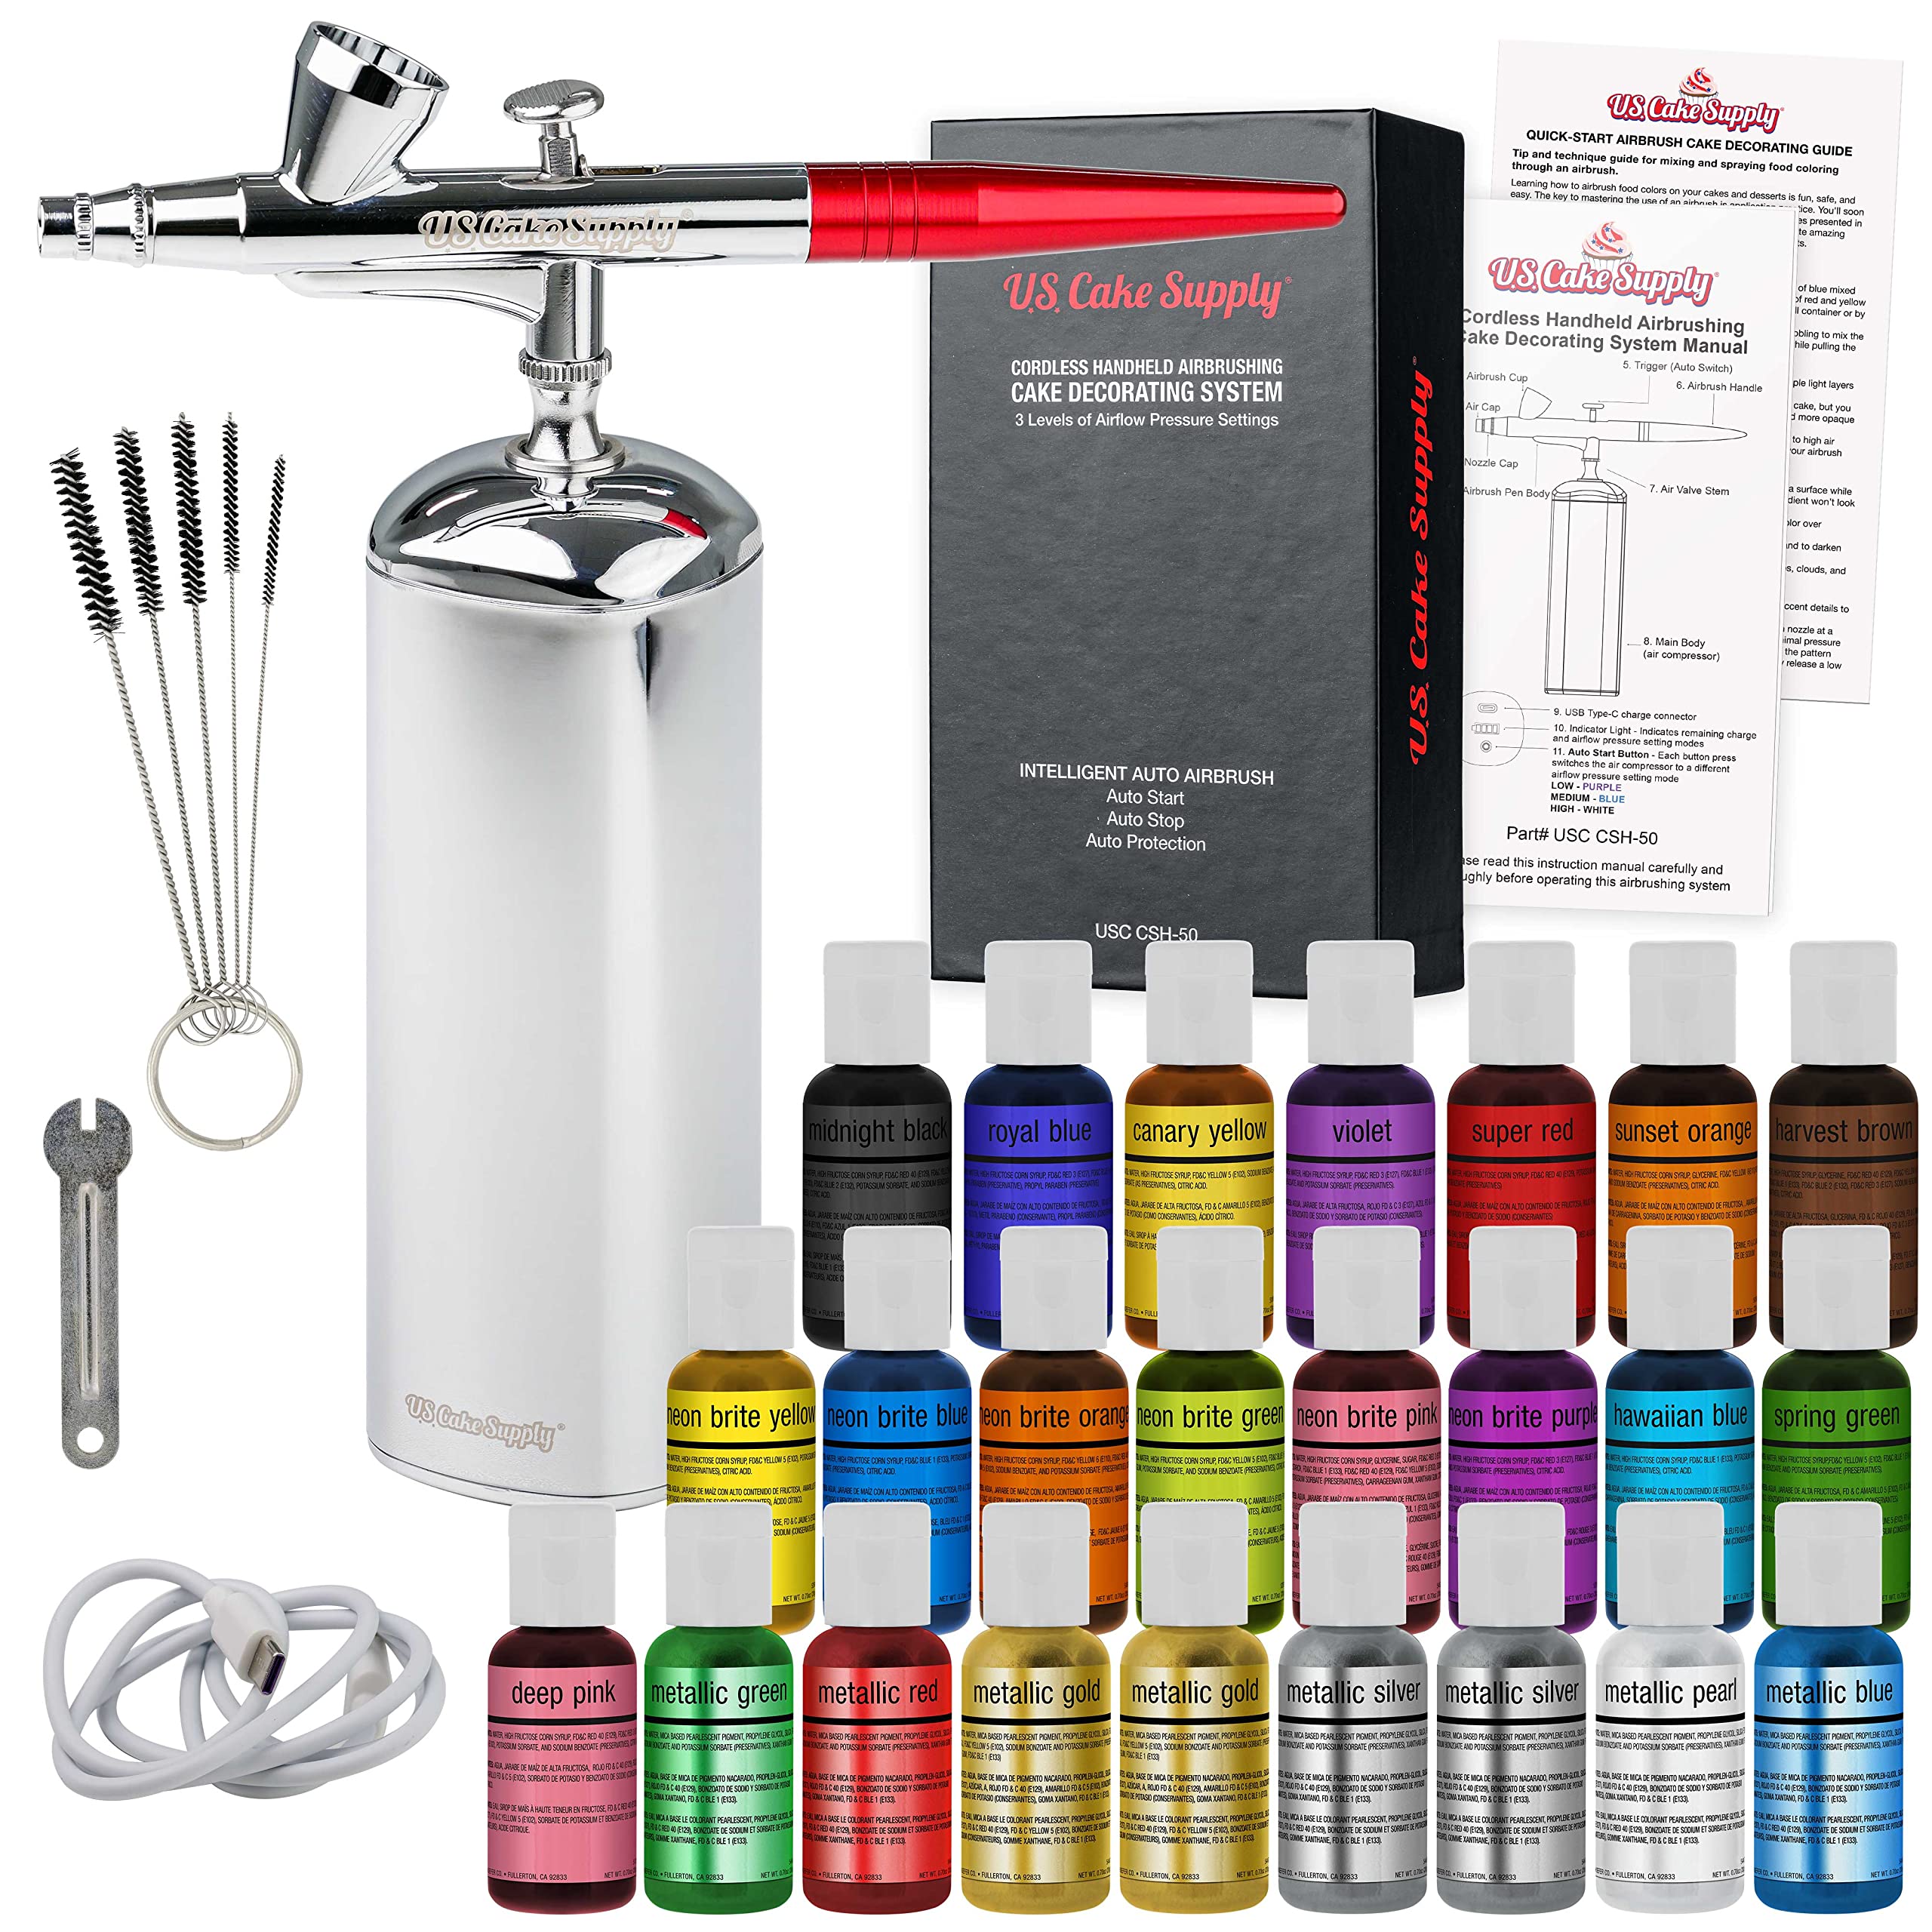 U.S. Cake Supply - Complete Cordless Handheld Airbrush Cake Decorating System Professional Kit with a Full Selection of 24 V